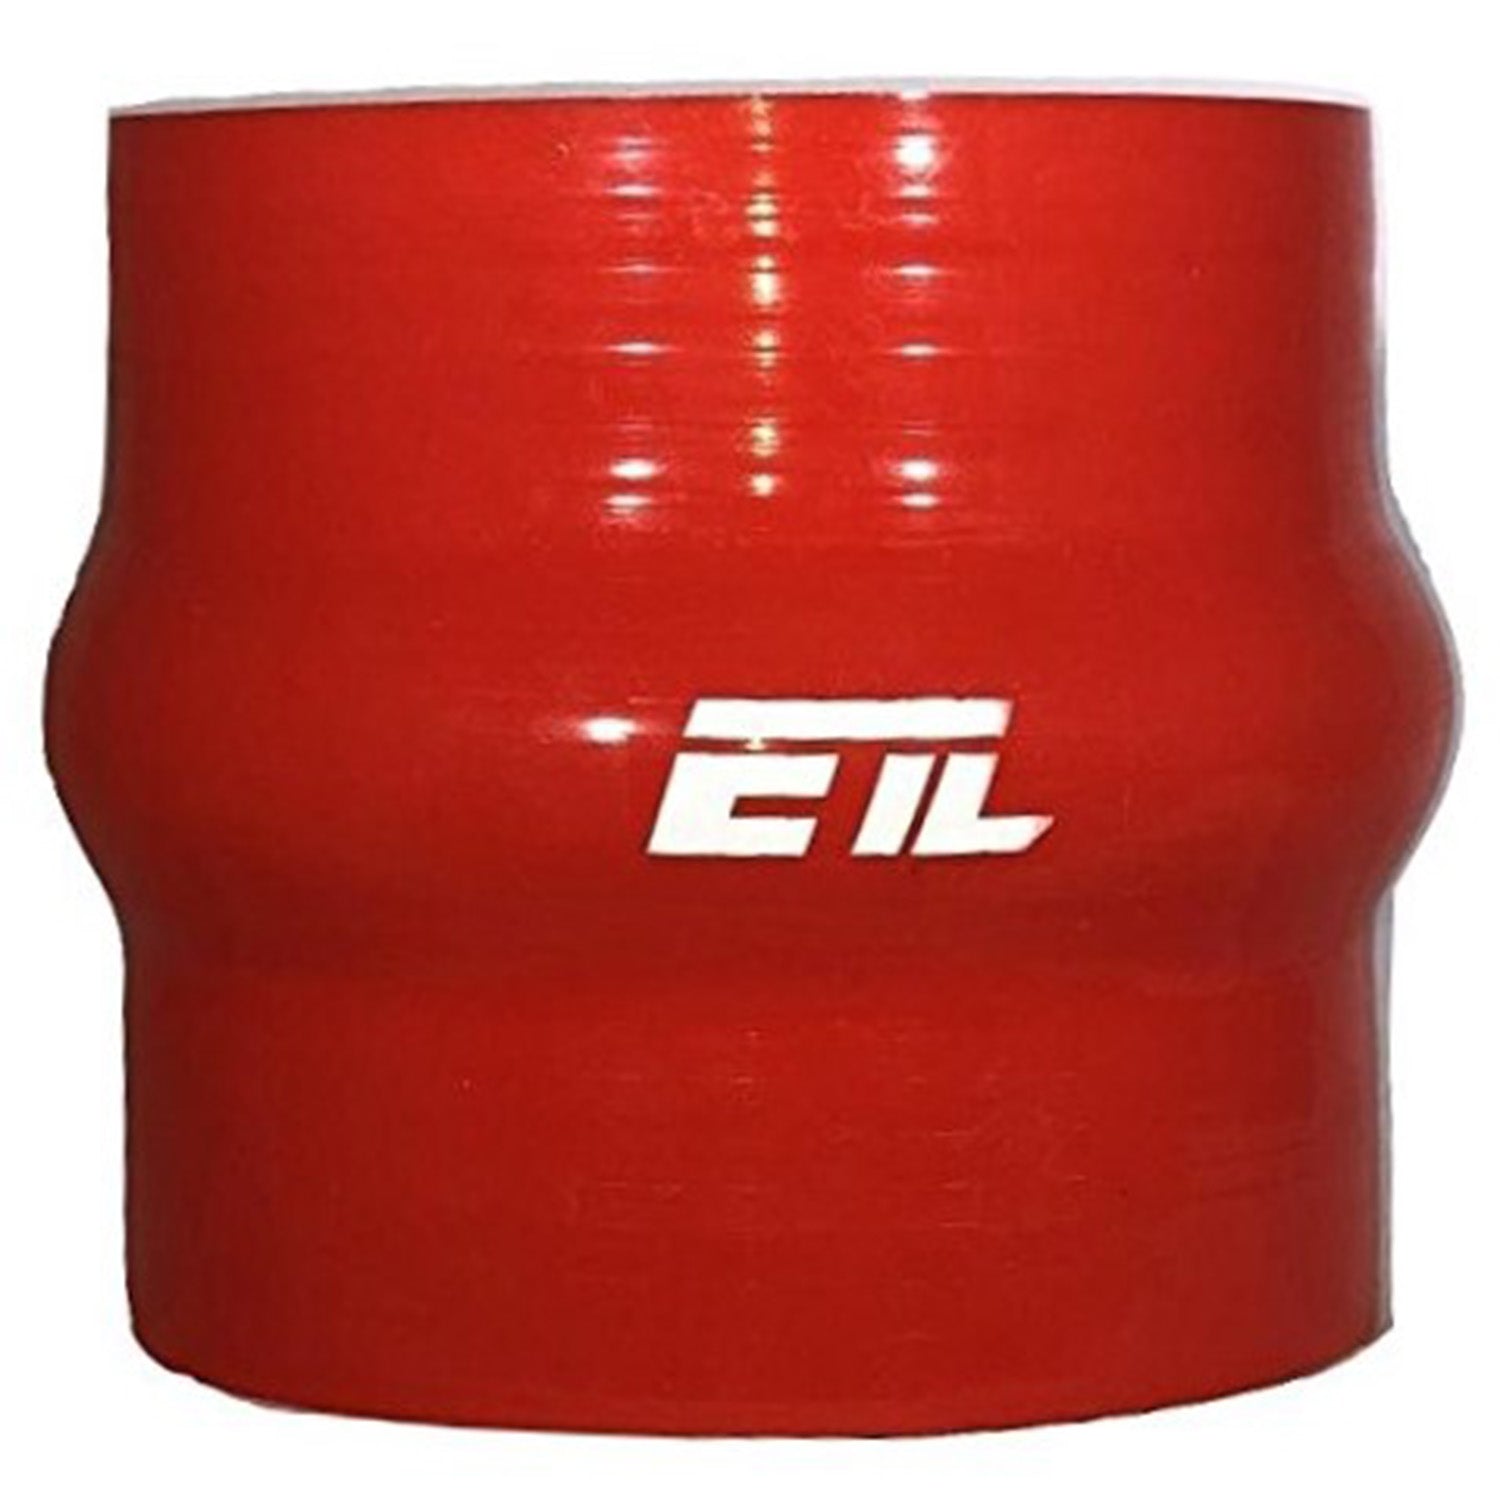 ETL Performance 233024 Silicone Hump Hose 2.00 Inch Diameter 3.00 Inch Red